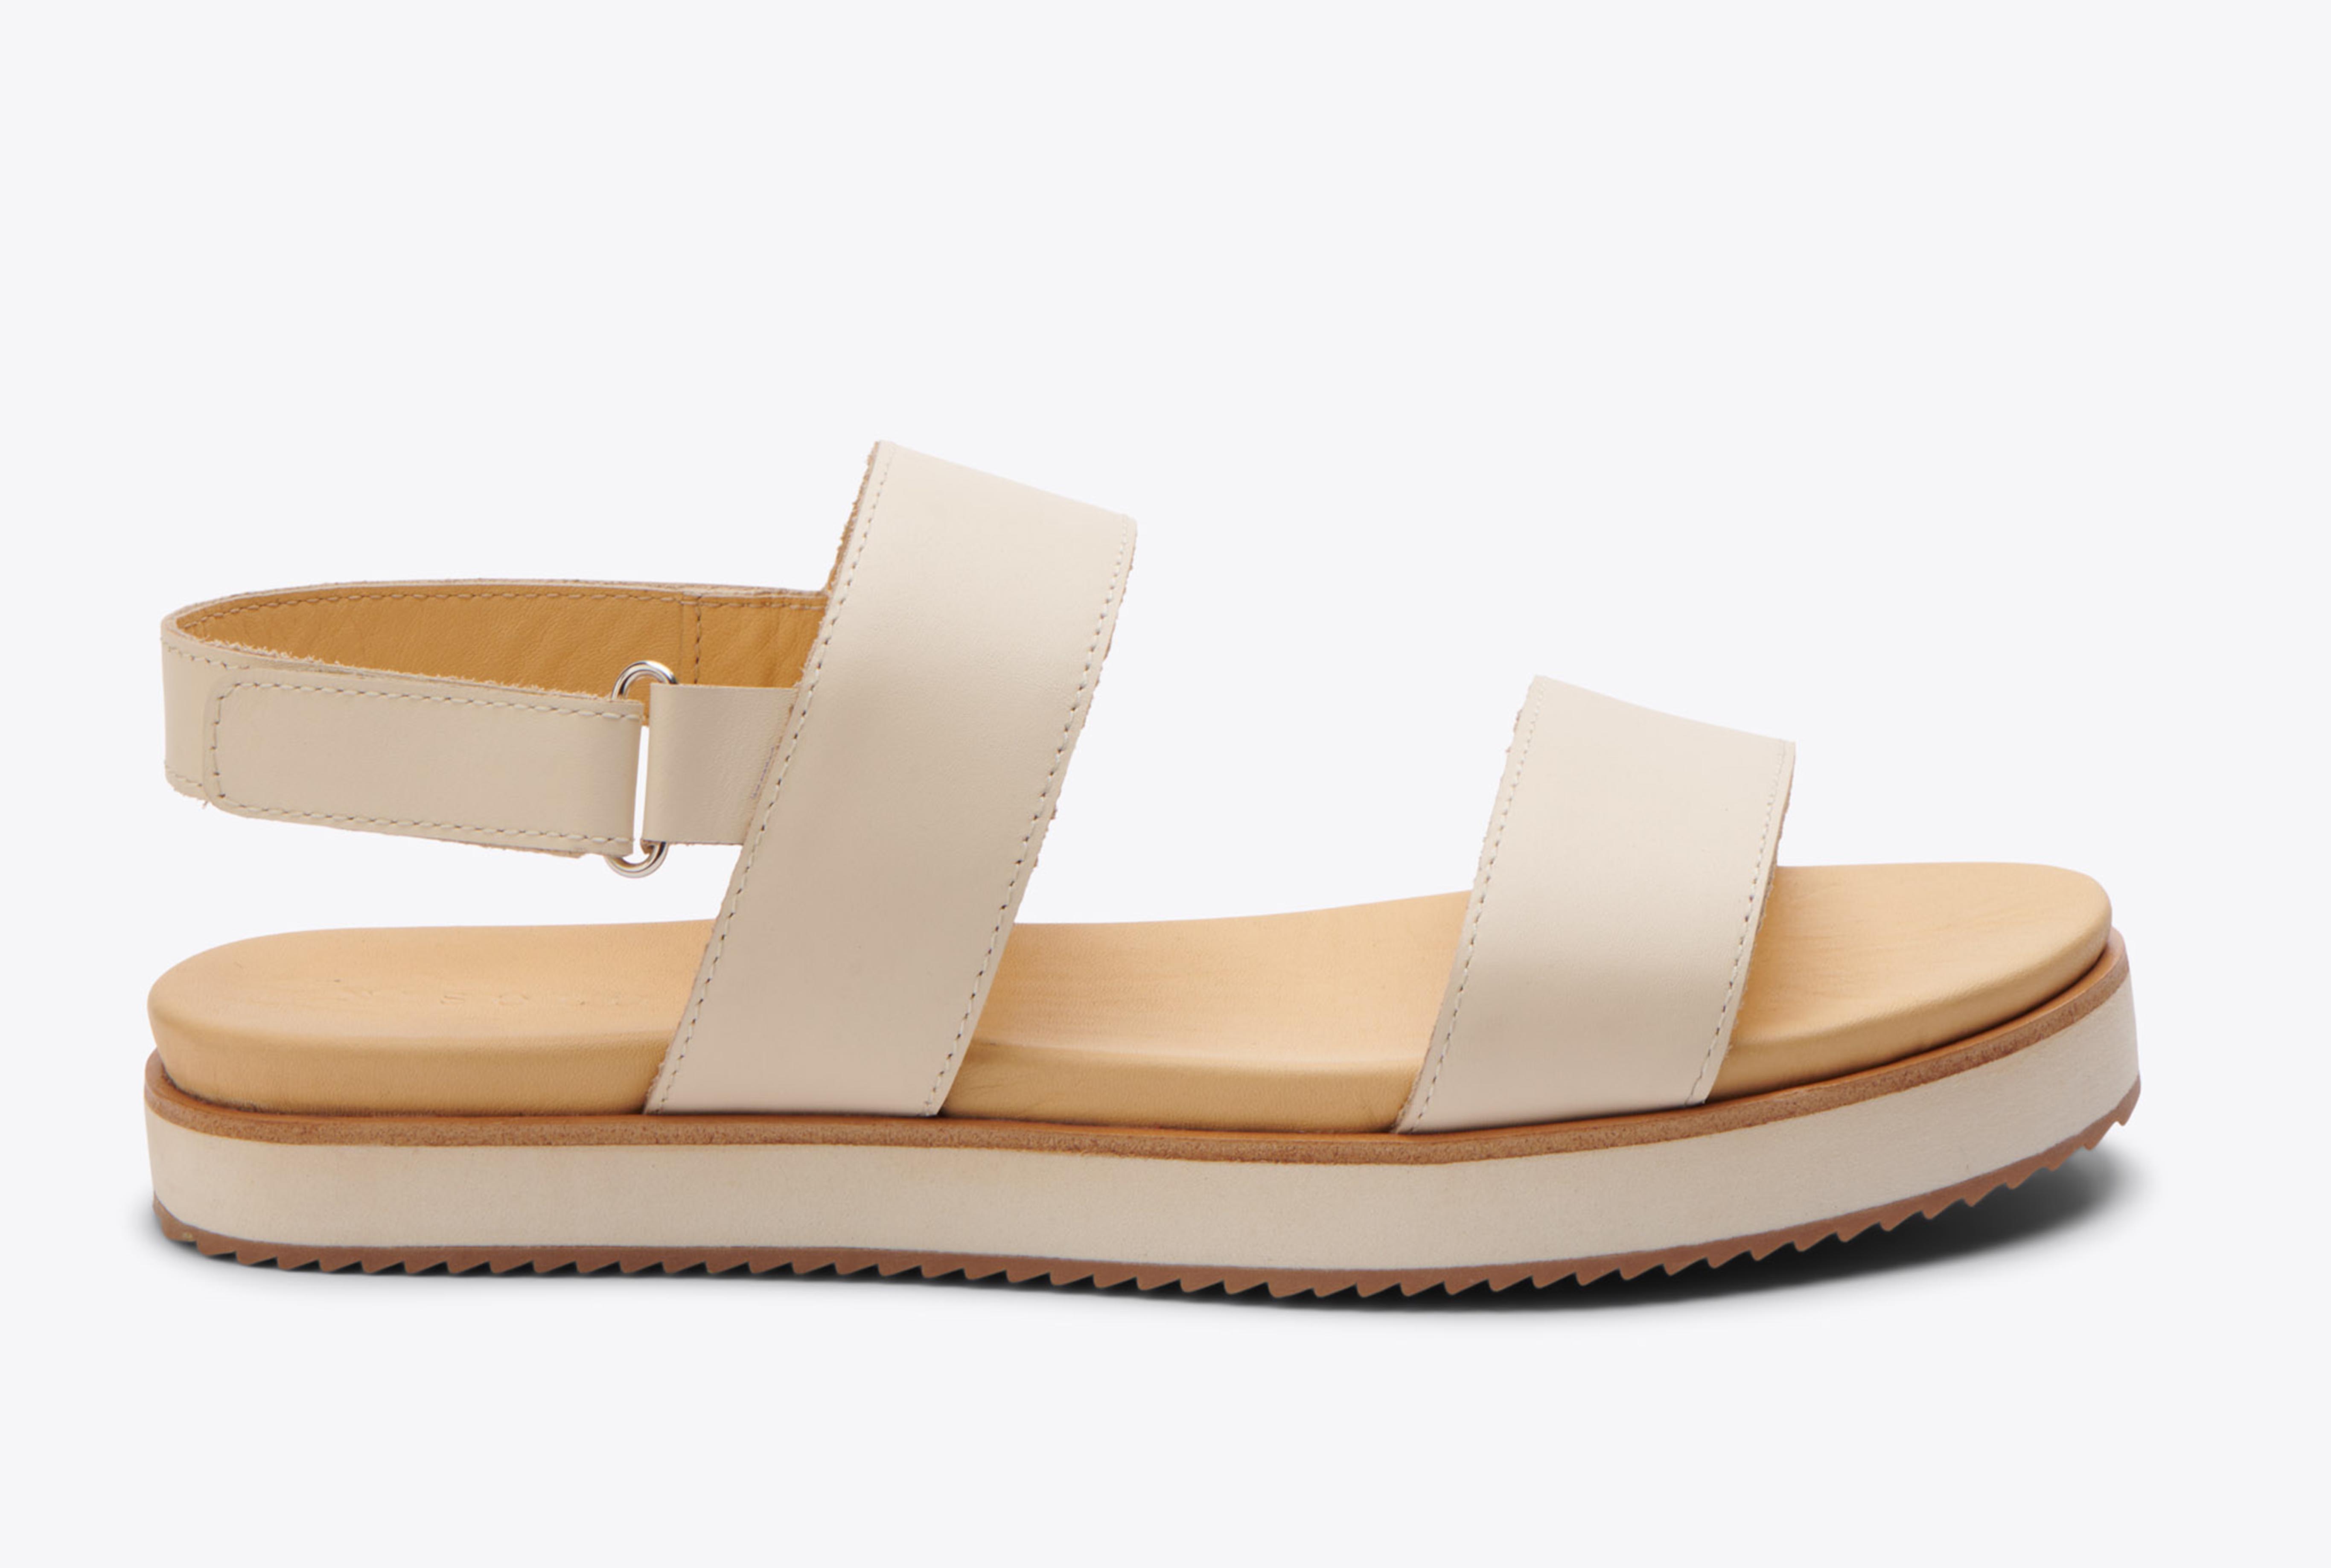 Nisolo Go-To Flatform Sandal Bone - Every Nisolo product is built on the foundation of comfort, function, and design. 